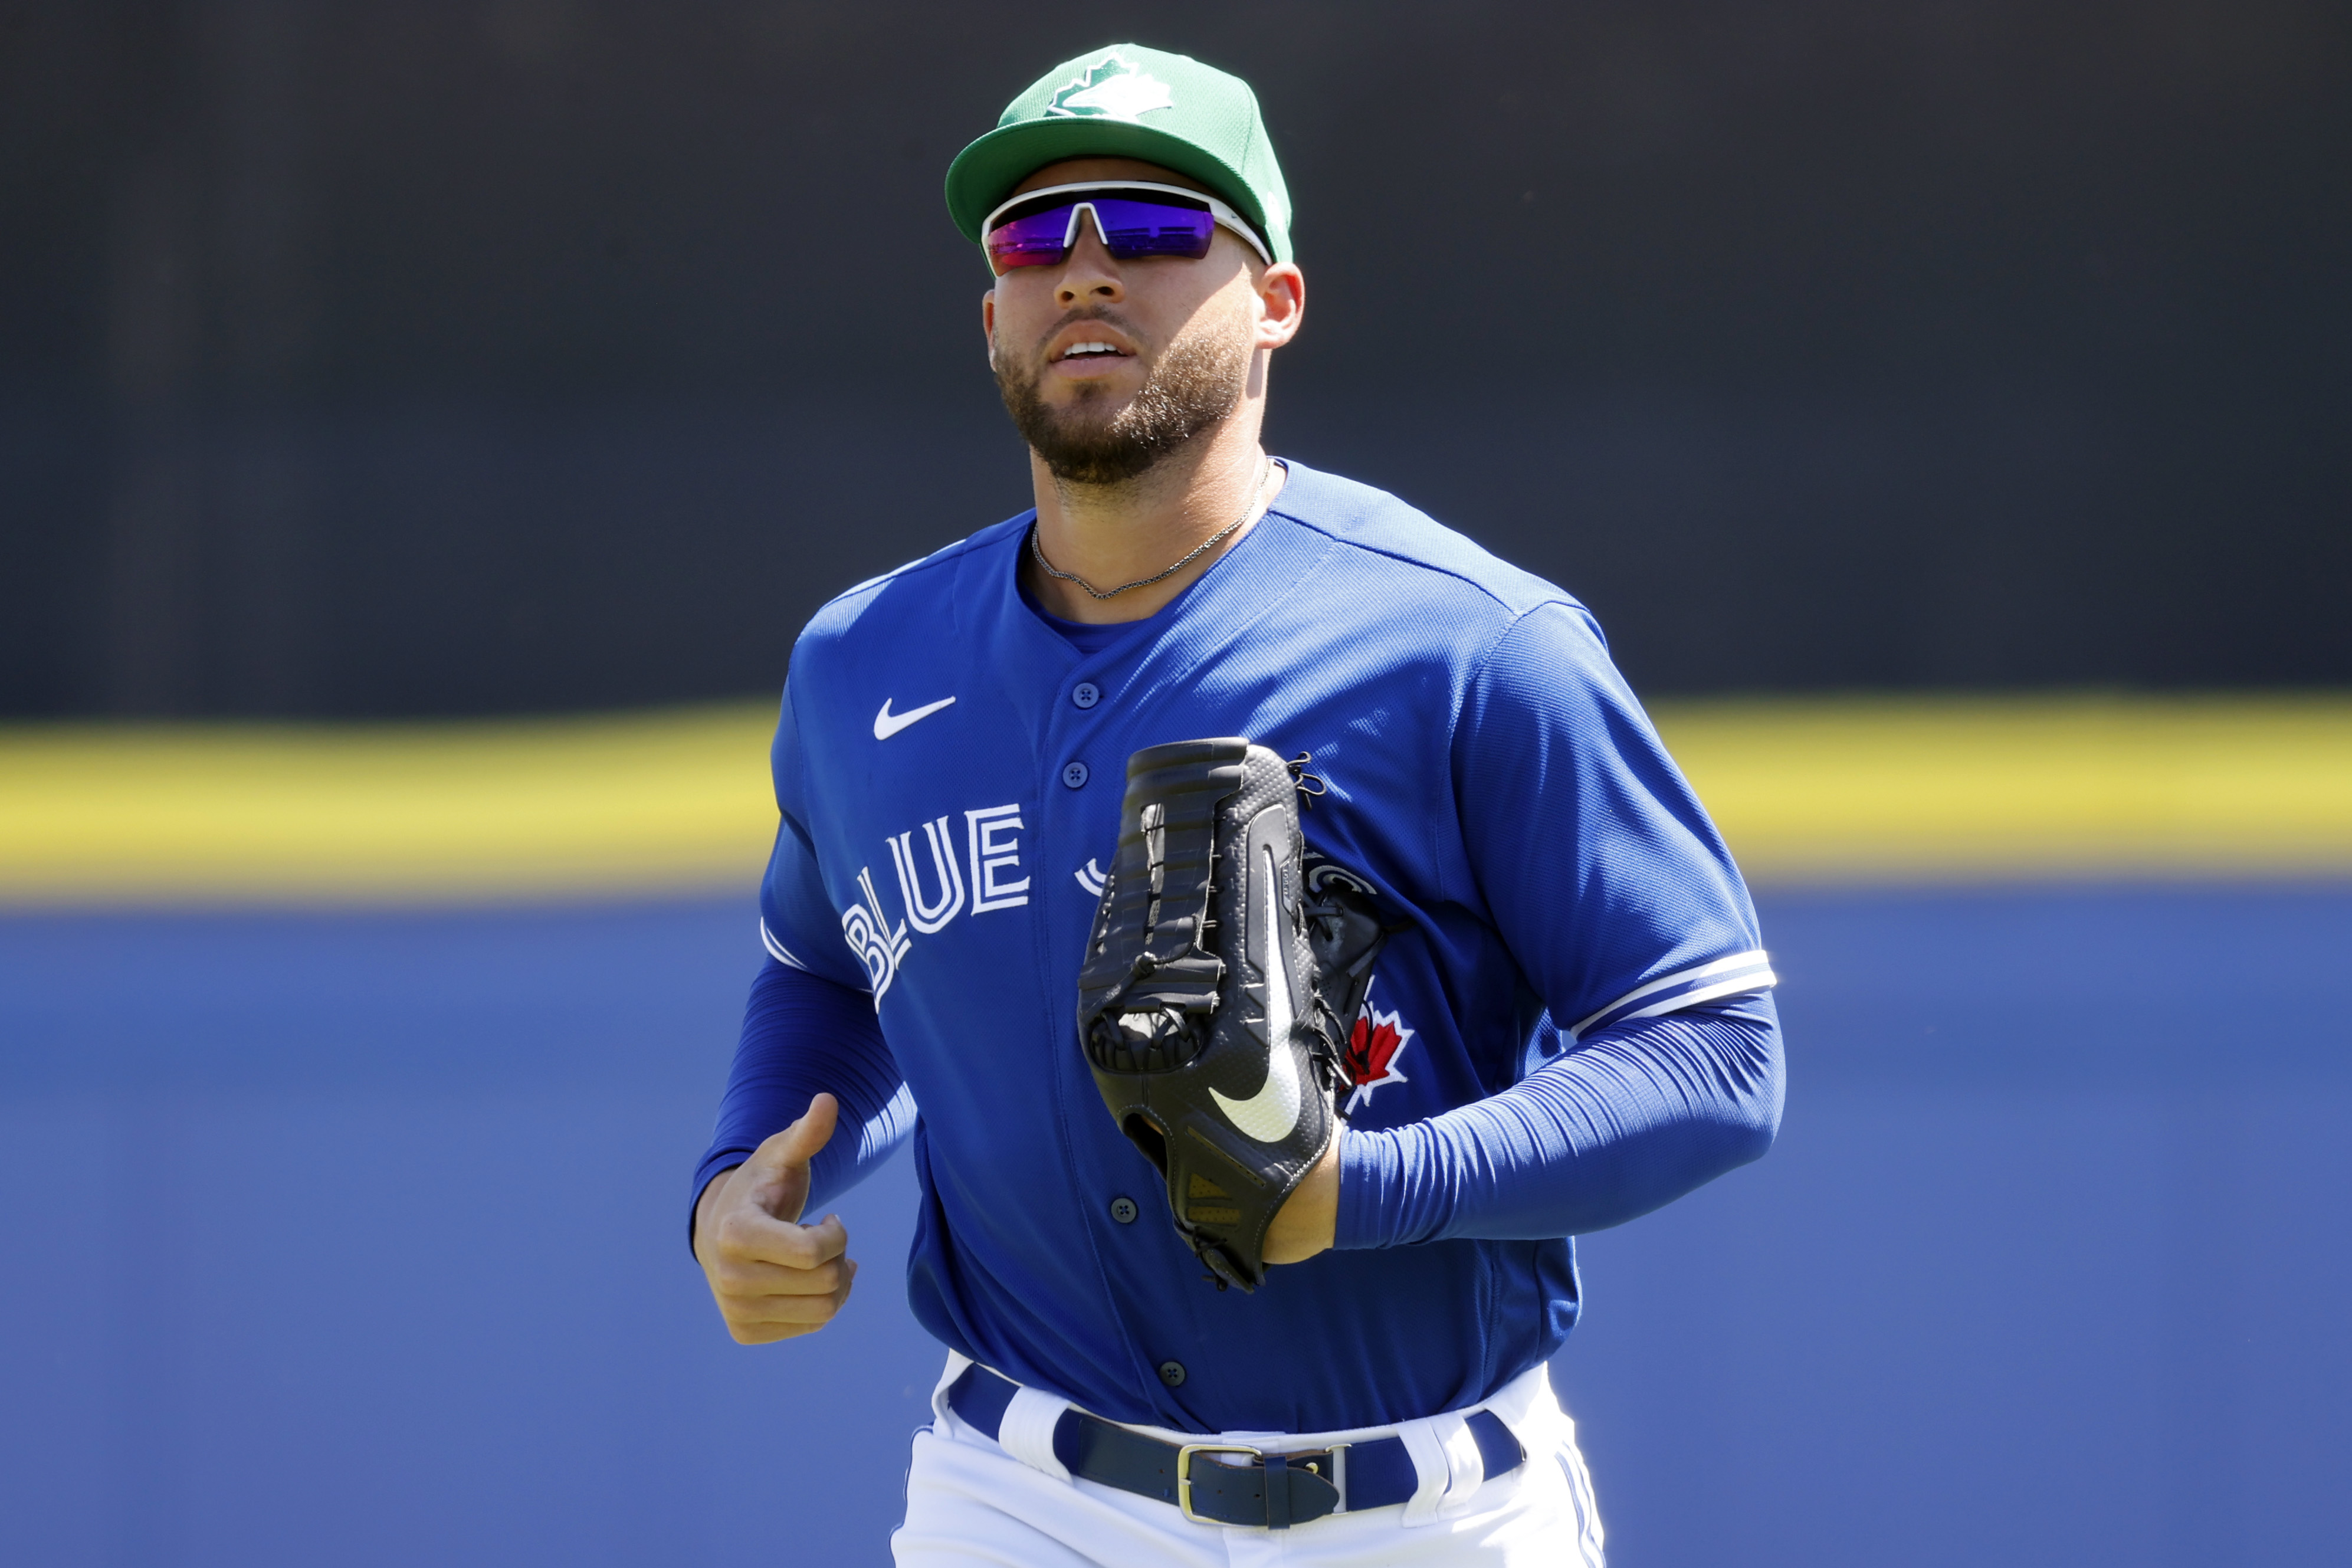 George Springer's Blue Jays debut delayed with IL stint to open